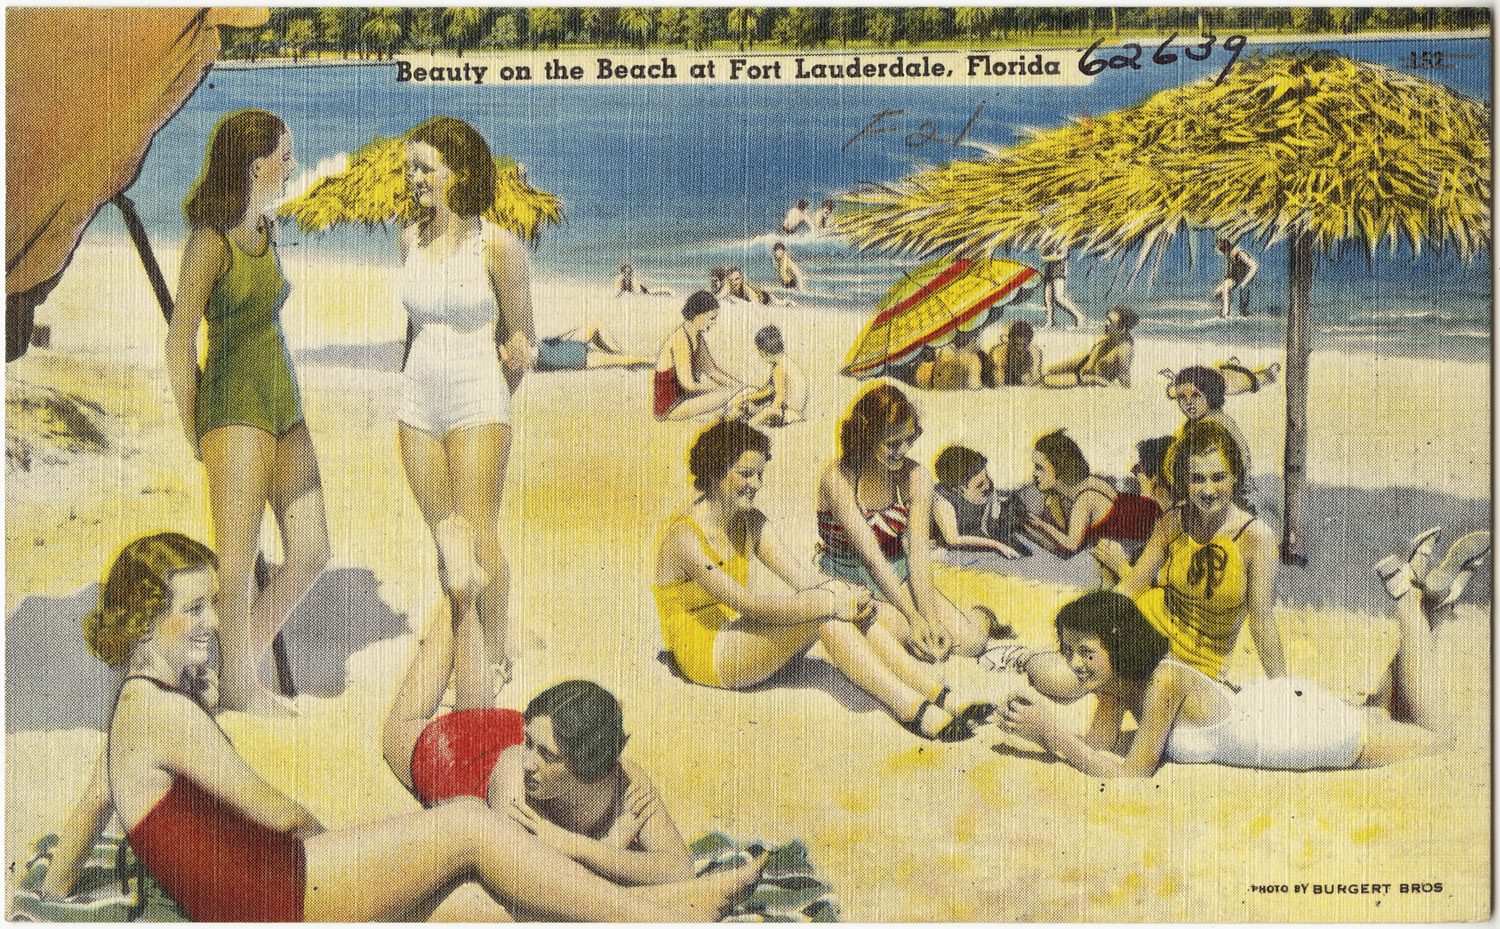 a man and woman on beach talking to others